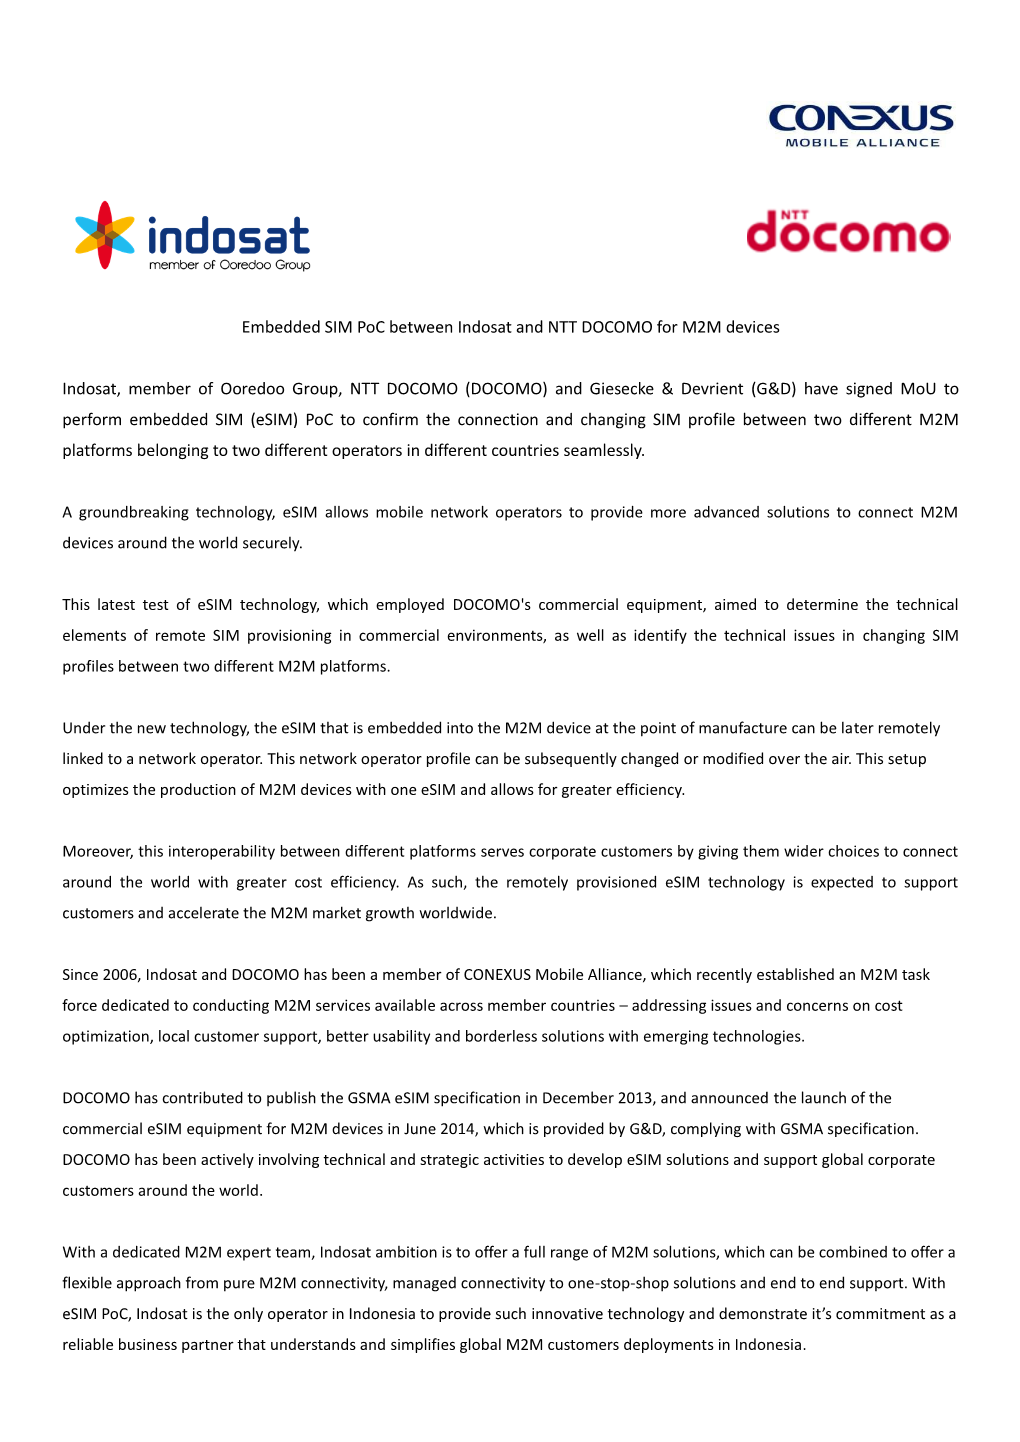 Embedded SIM Poc Between Indosat and NTT DOCOMO for M2M Devices